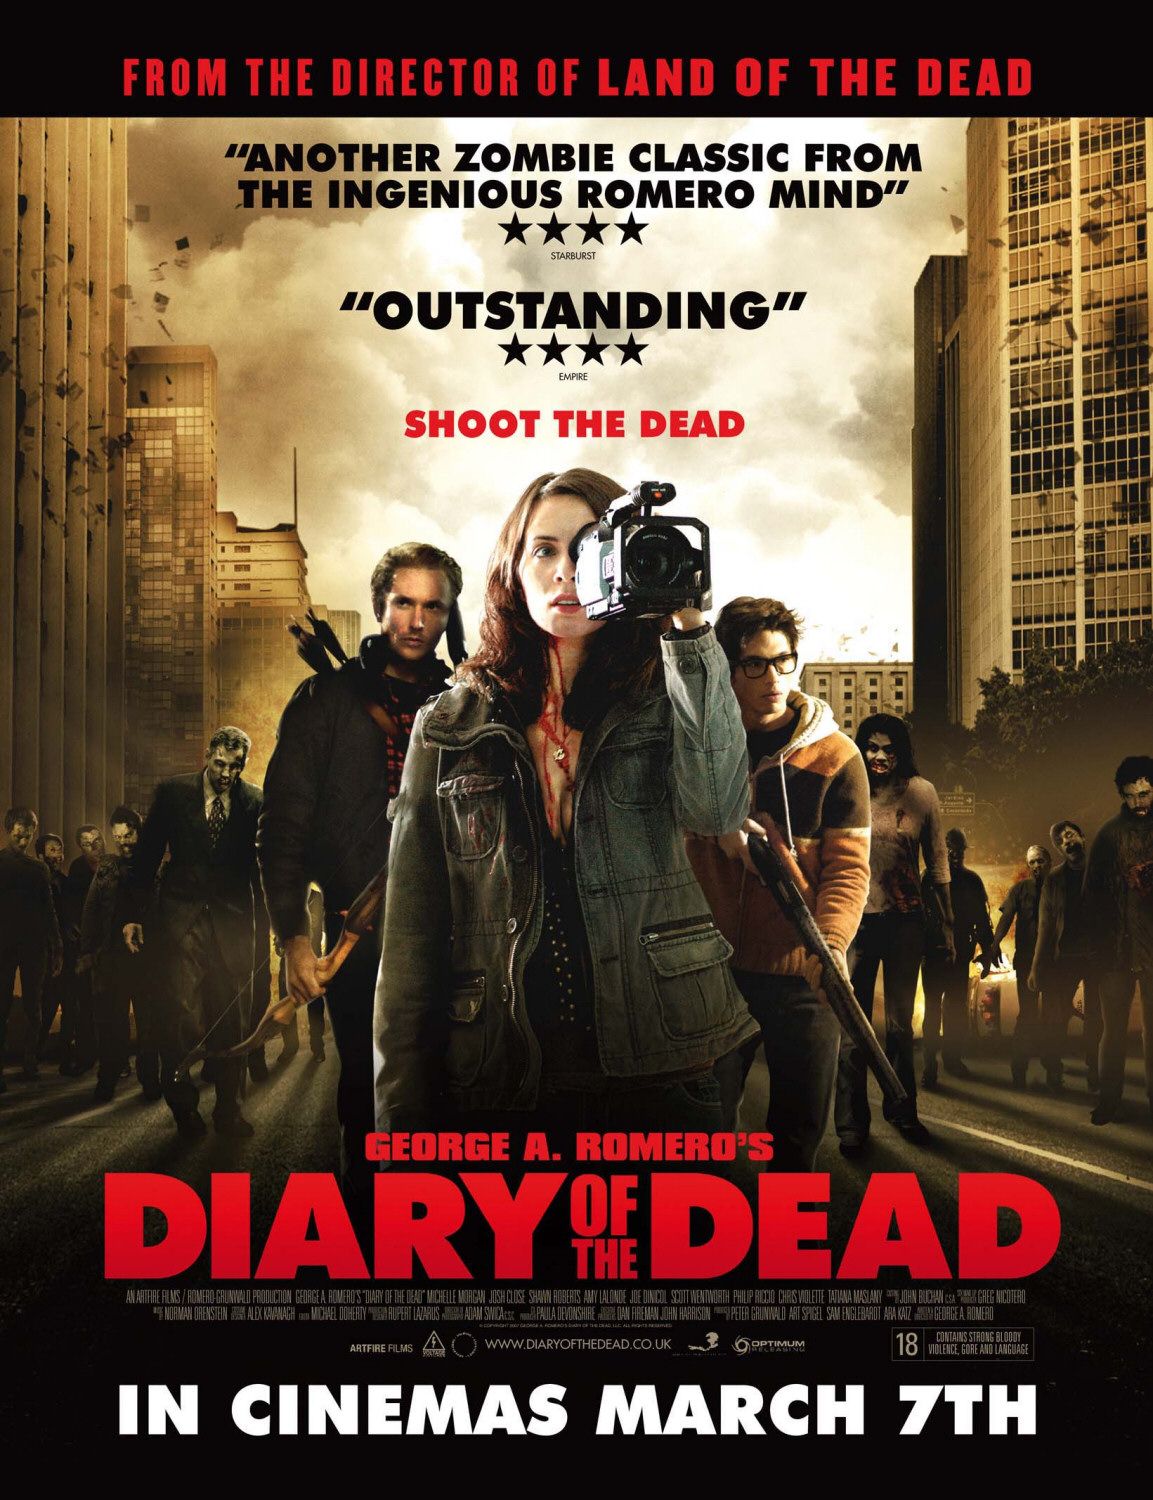 Diary Of The Dead HD wallpapers, Desktop wallpaper - most viewed